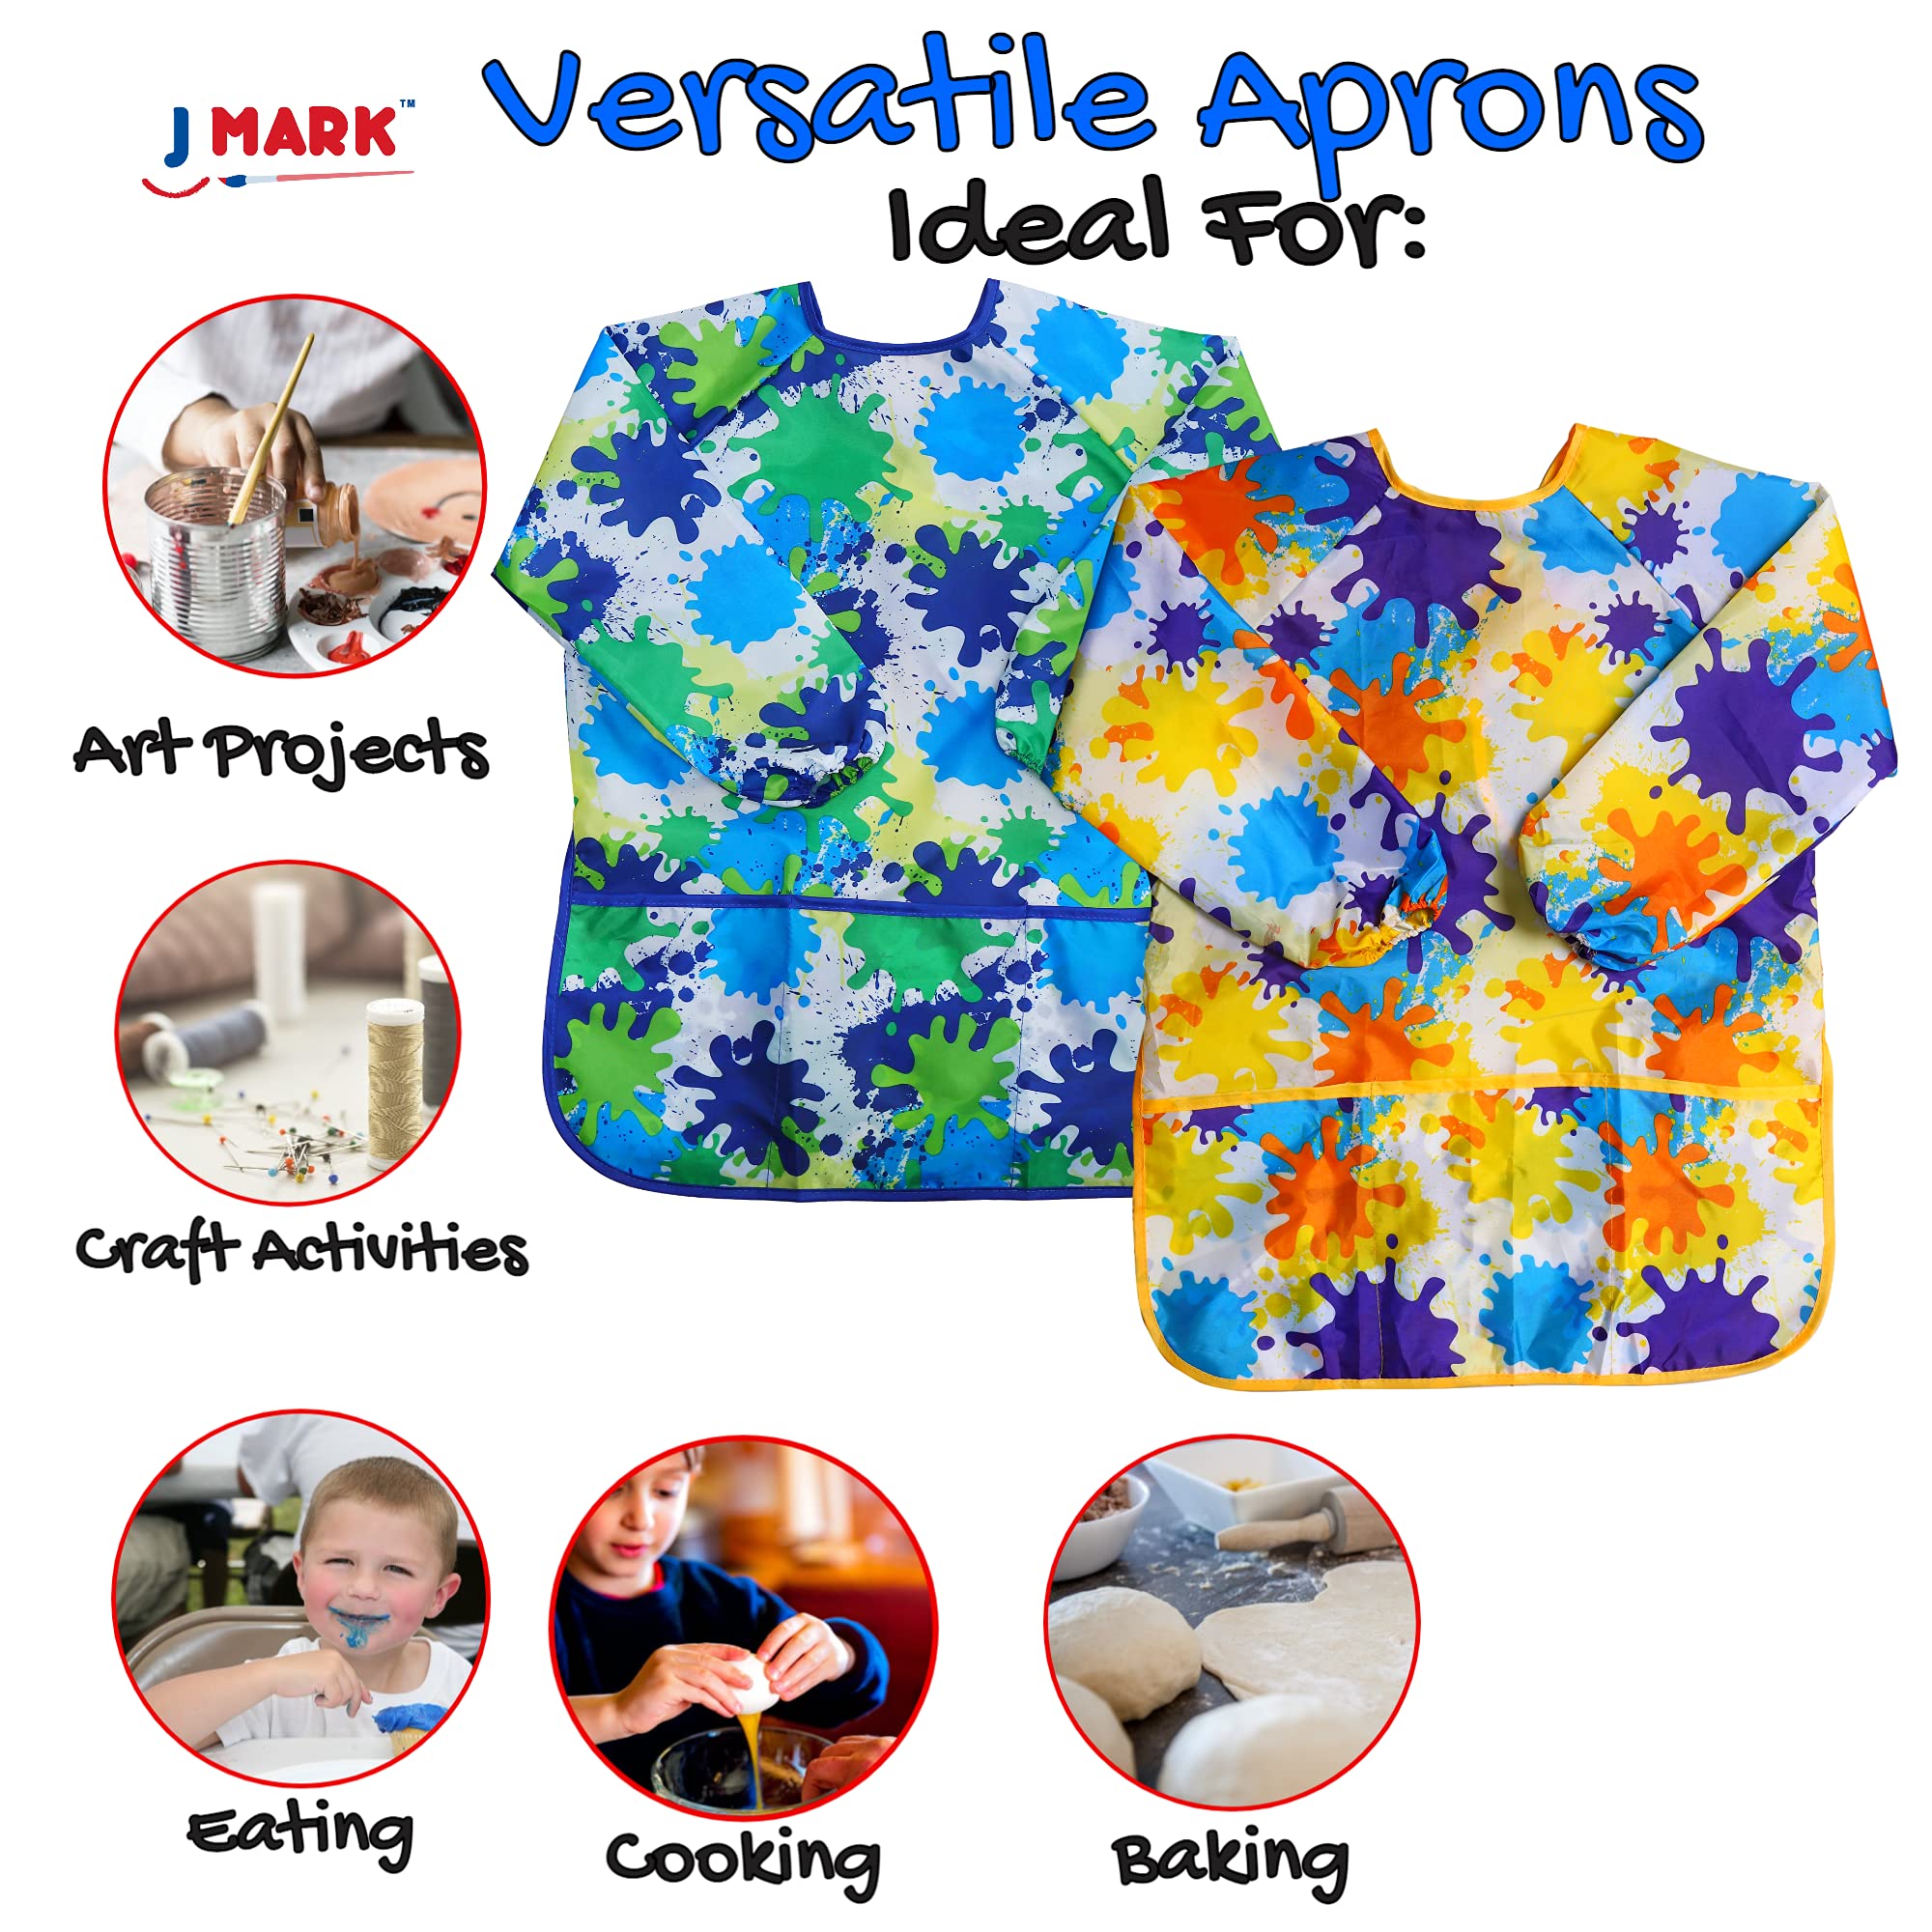 J MARK Waterproof Kids Art Smock Painting Apron 2 Pack Long Sleeve and 2 Pockets for Baking, Eating, Arts & Crafts